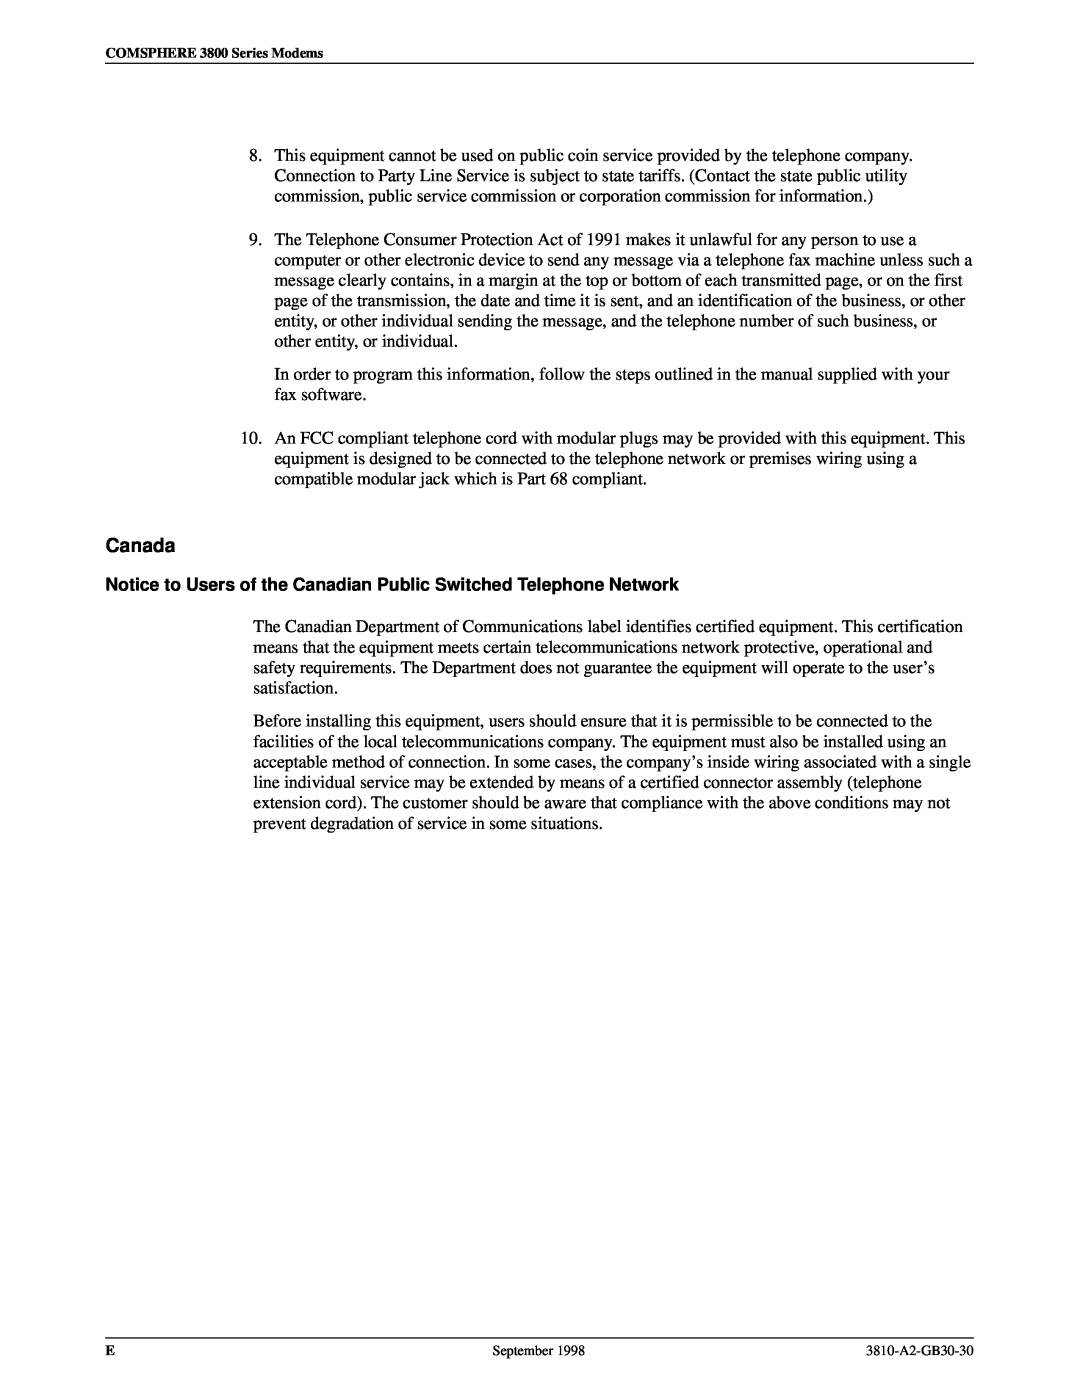 Paradyne 3800 manual Canada, Notice to Users of the Canadian Public Switched Telephone Network 